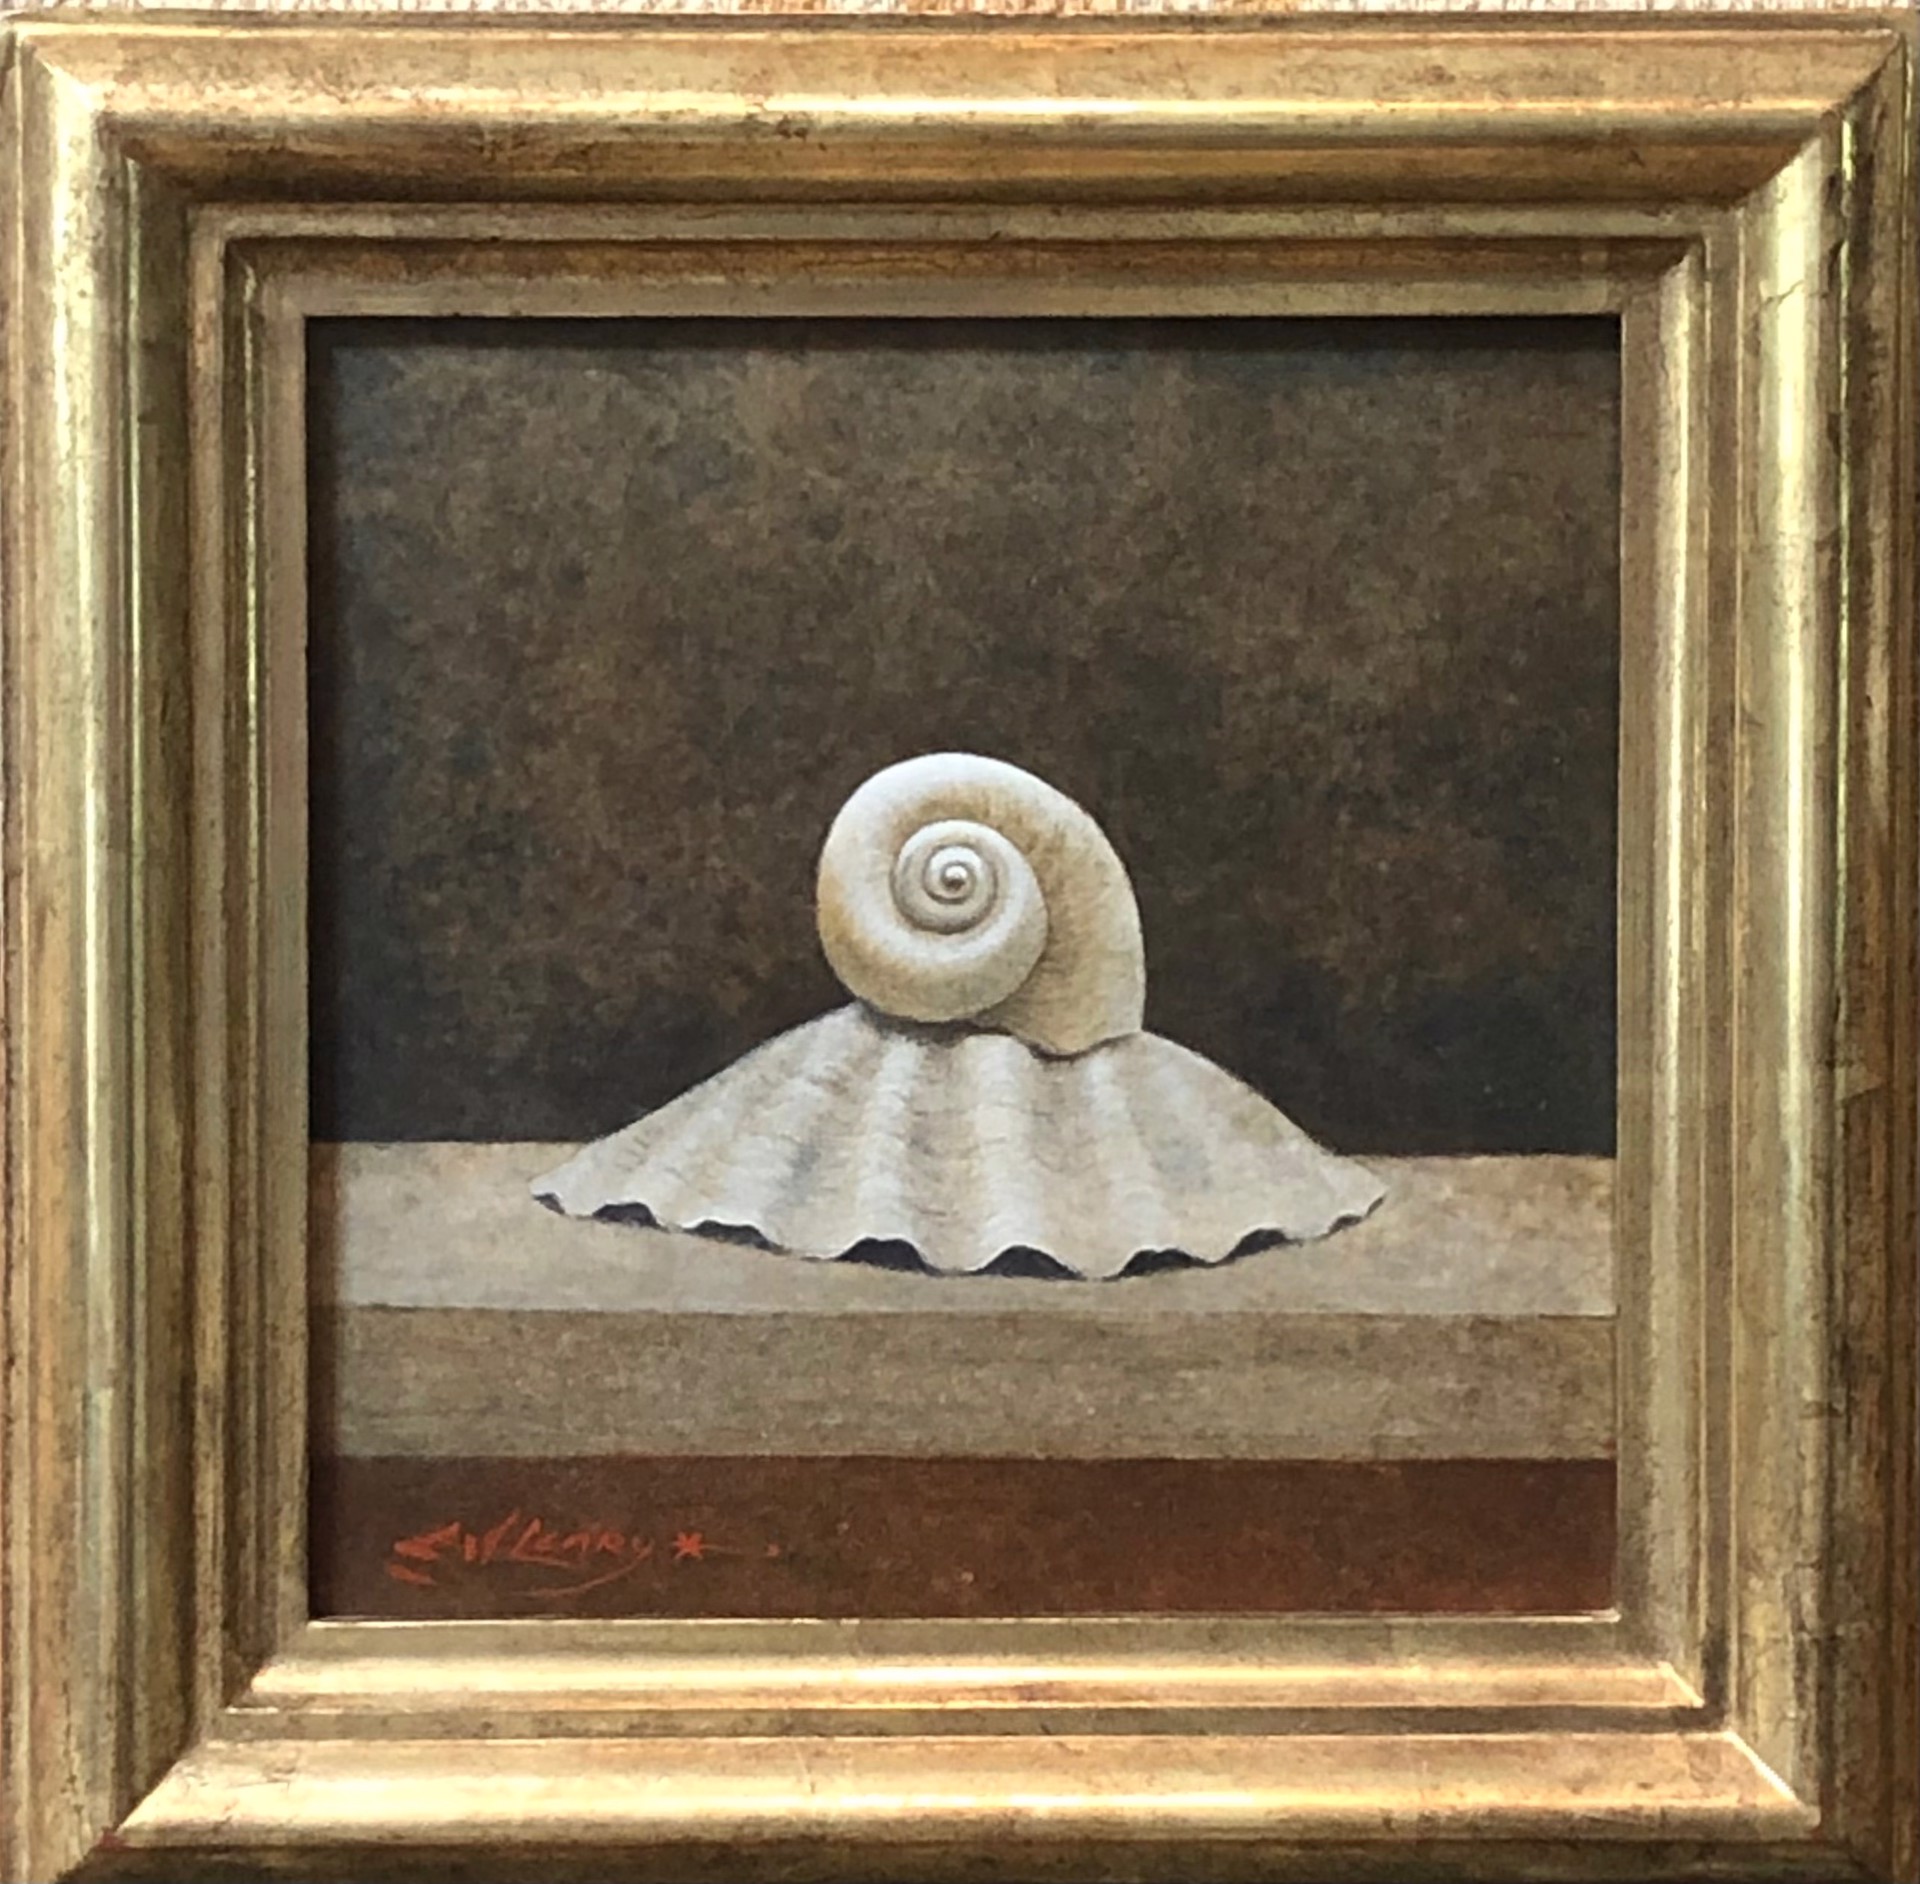 Moon Shell and Scallop by Elizabeth Leary